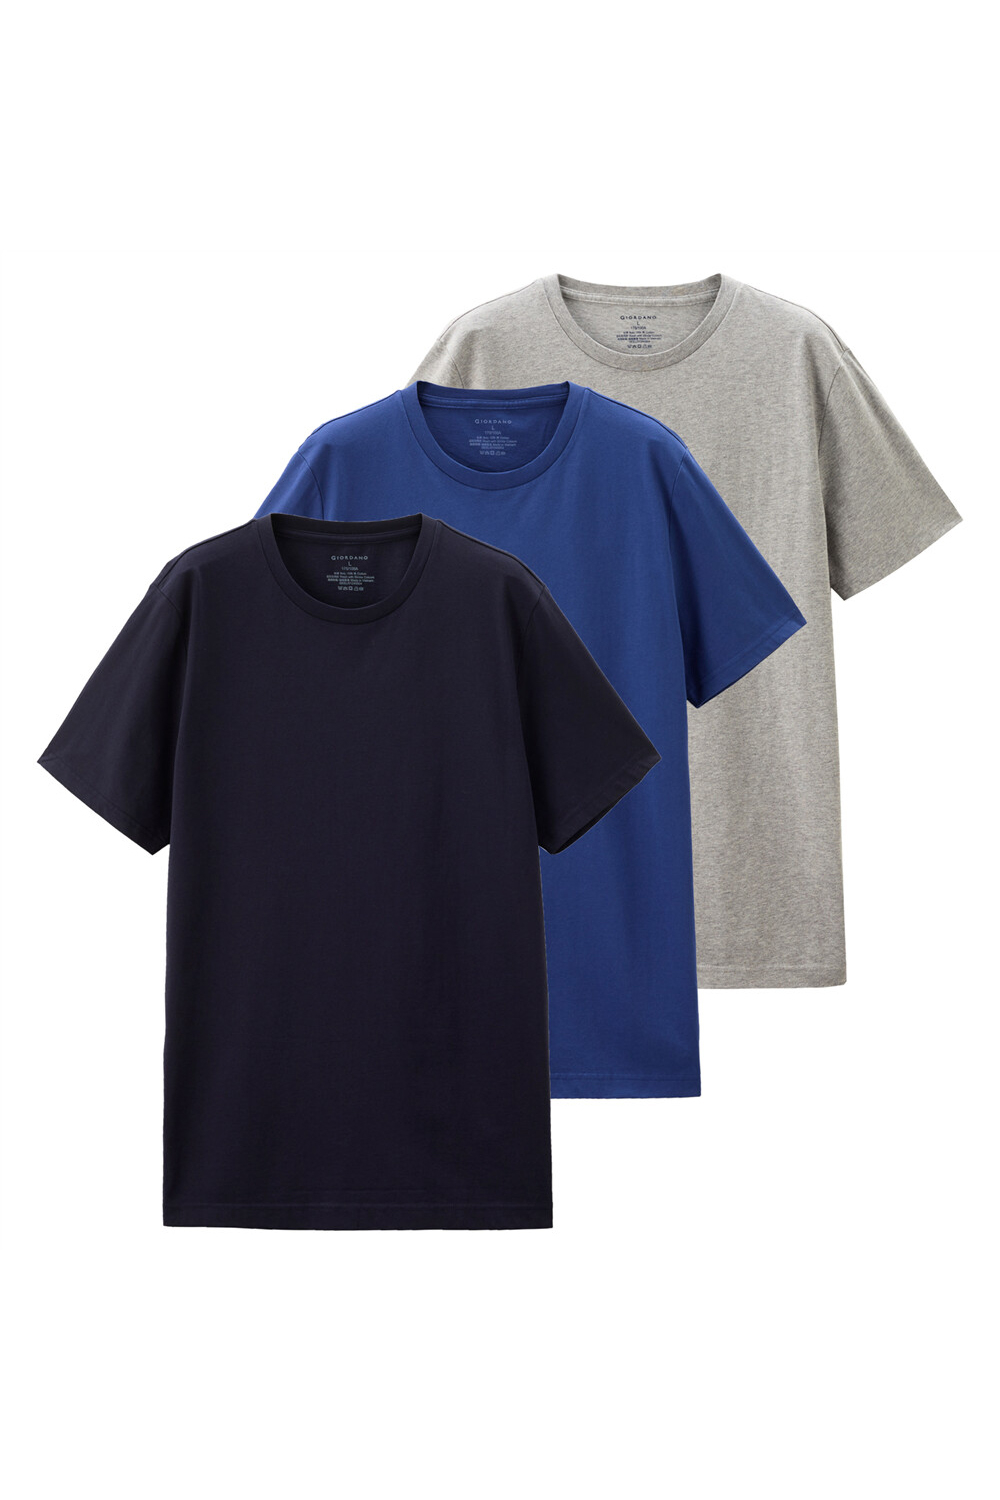 Giordano Solid Crew Neck 3 Pack Navy Blue Tshirts | Odel.lk